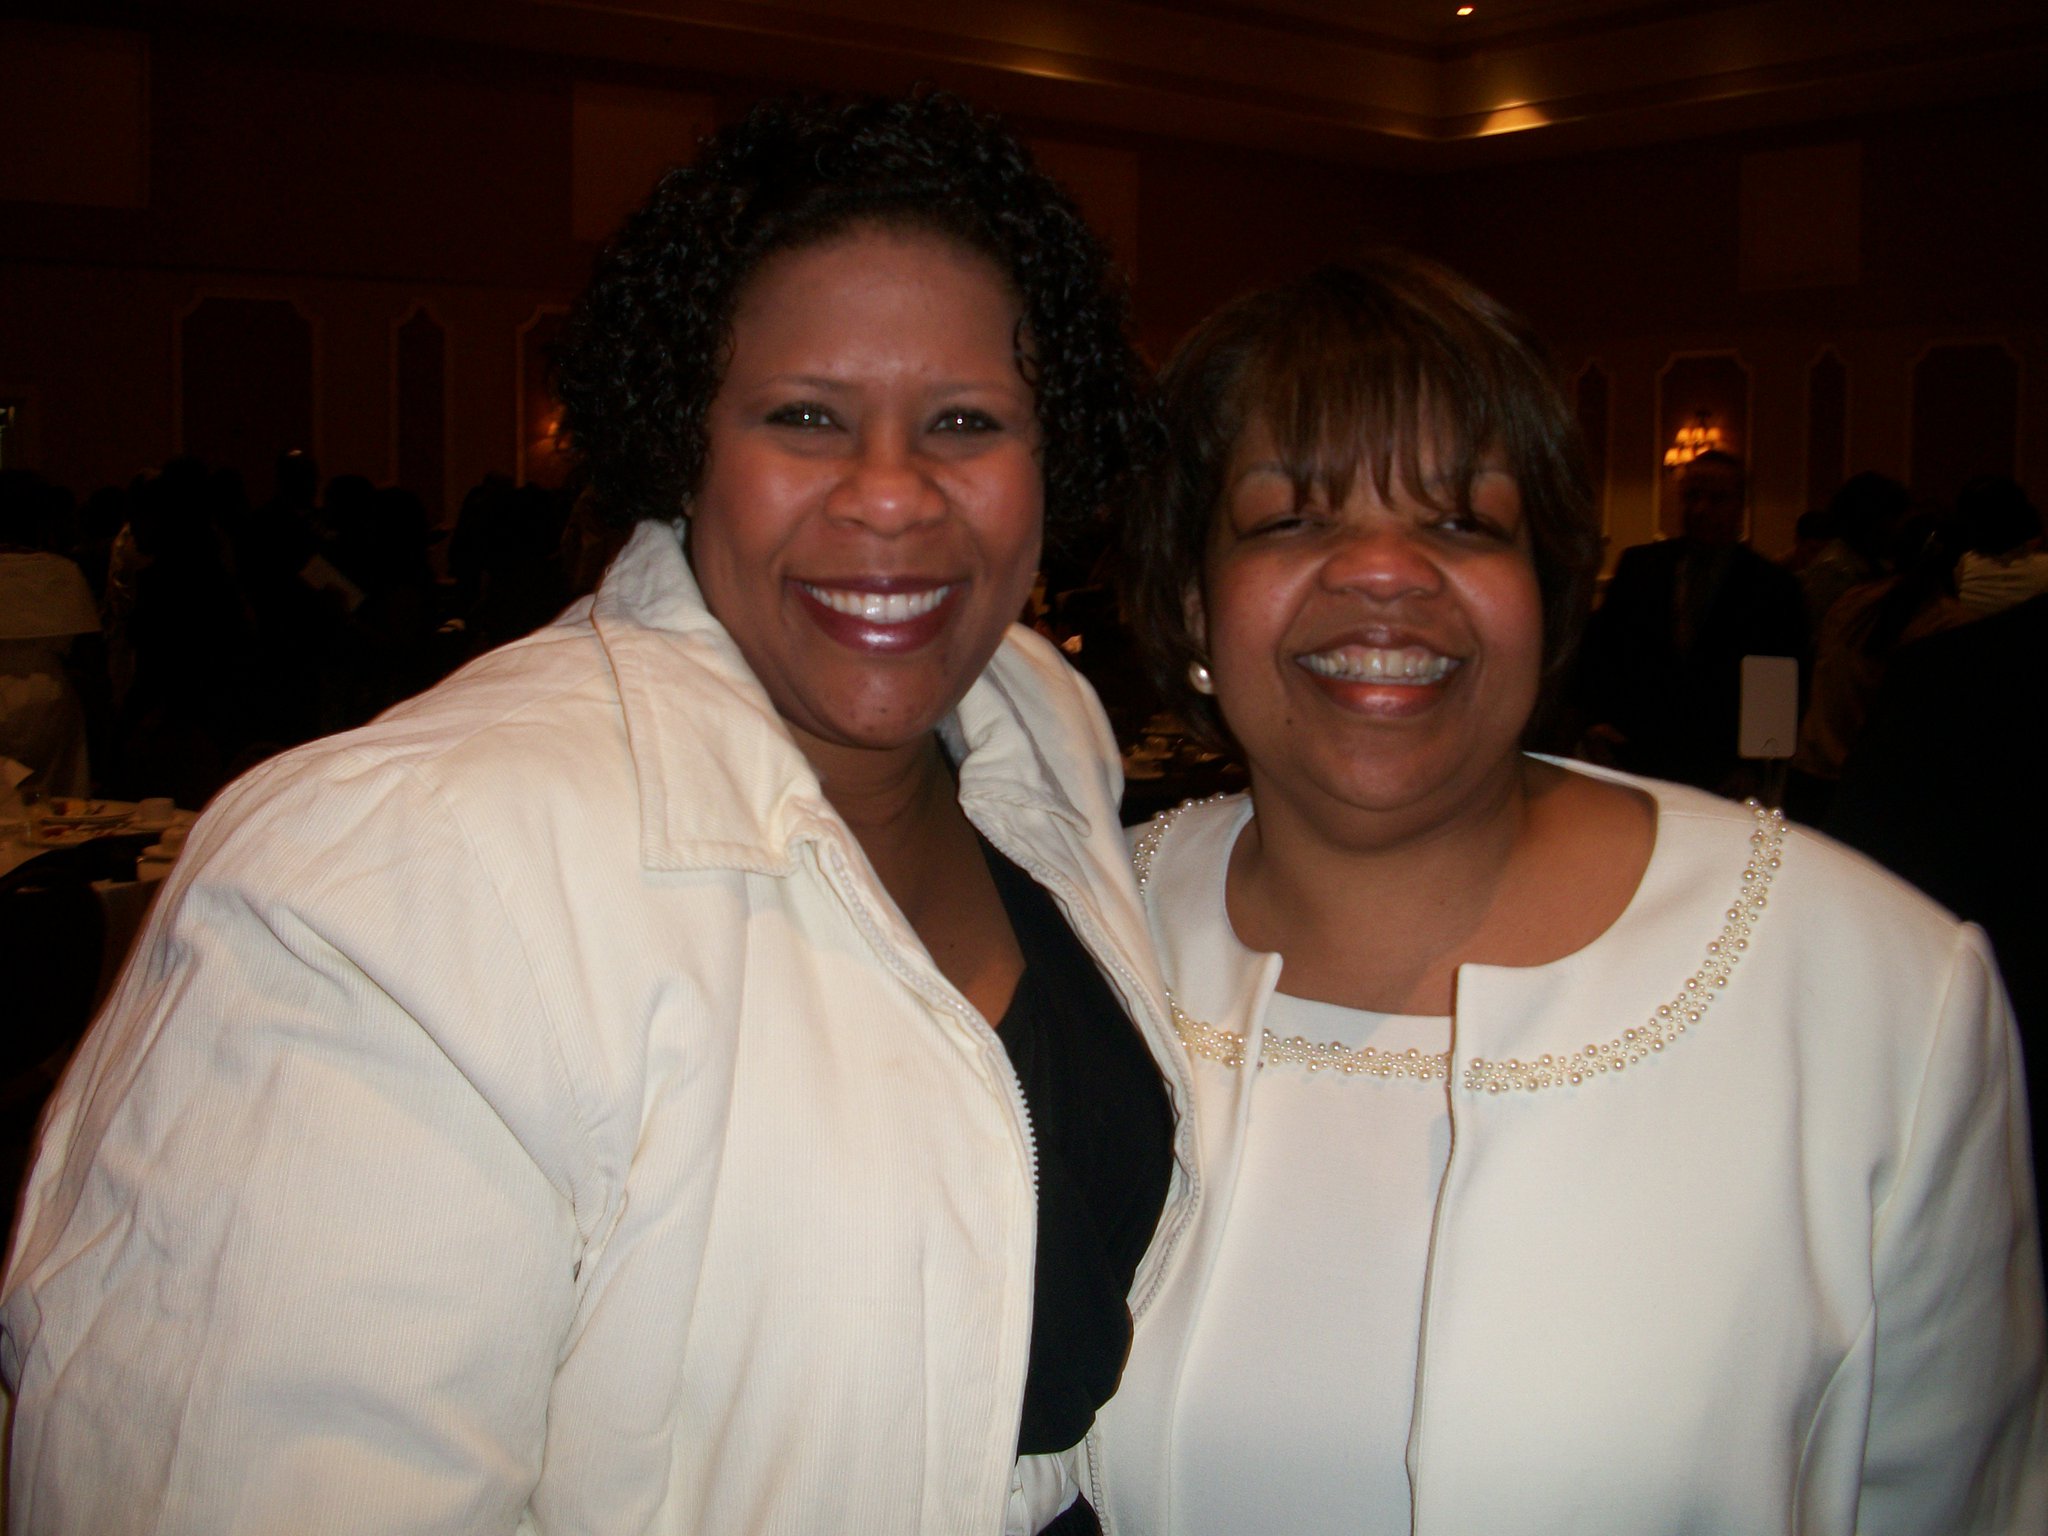 Sharon Munfus and Friend at the Orlando Women's Conference